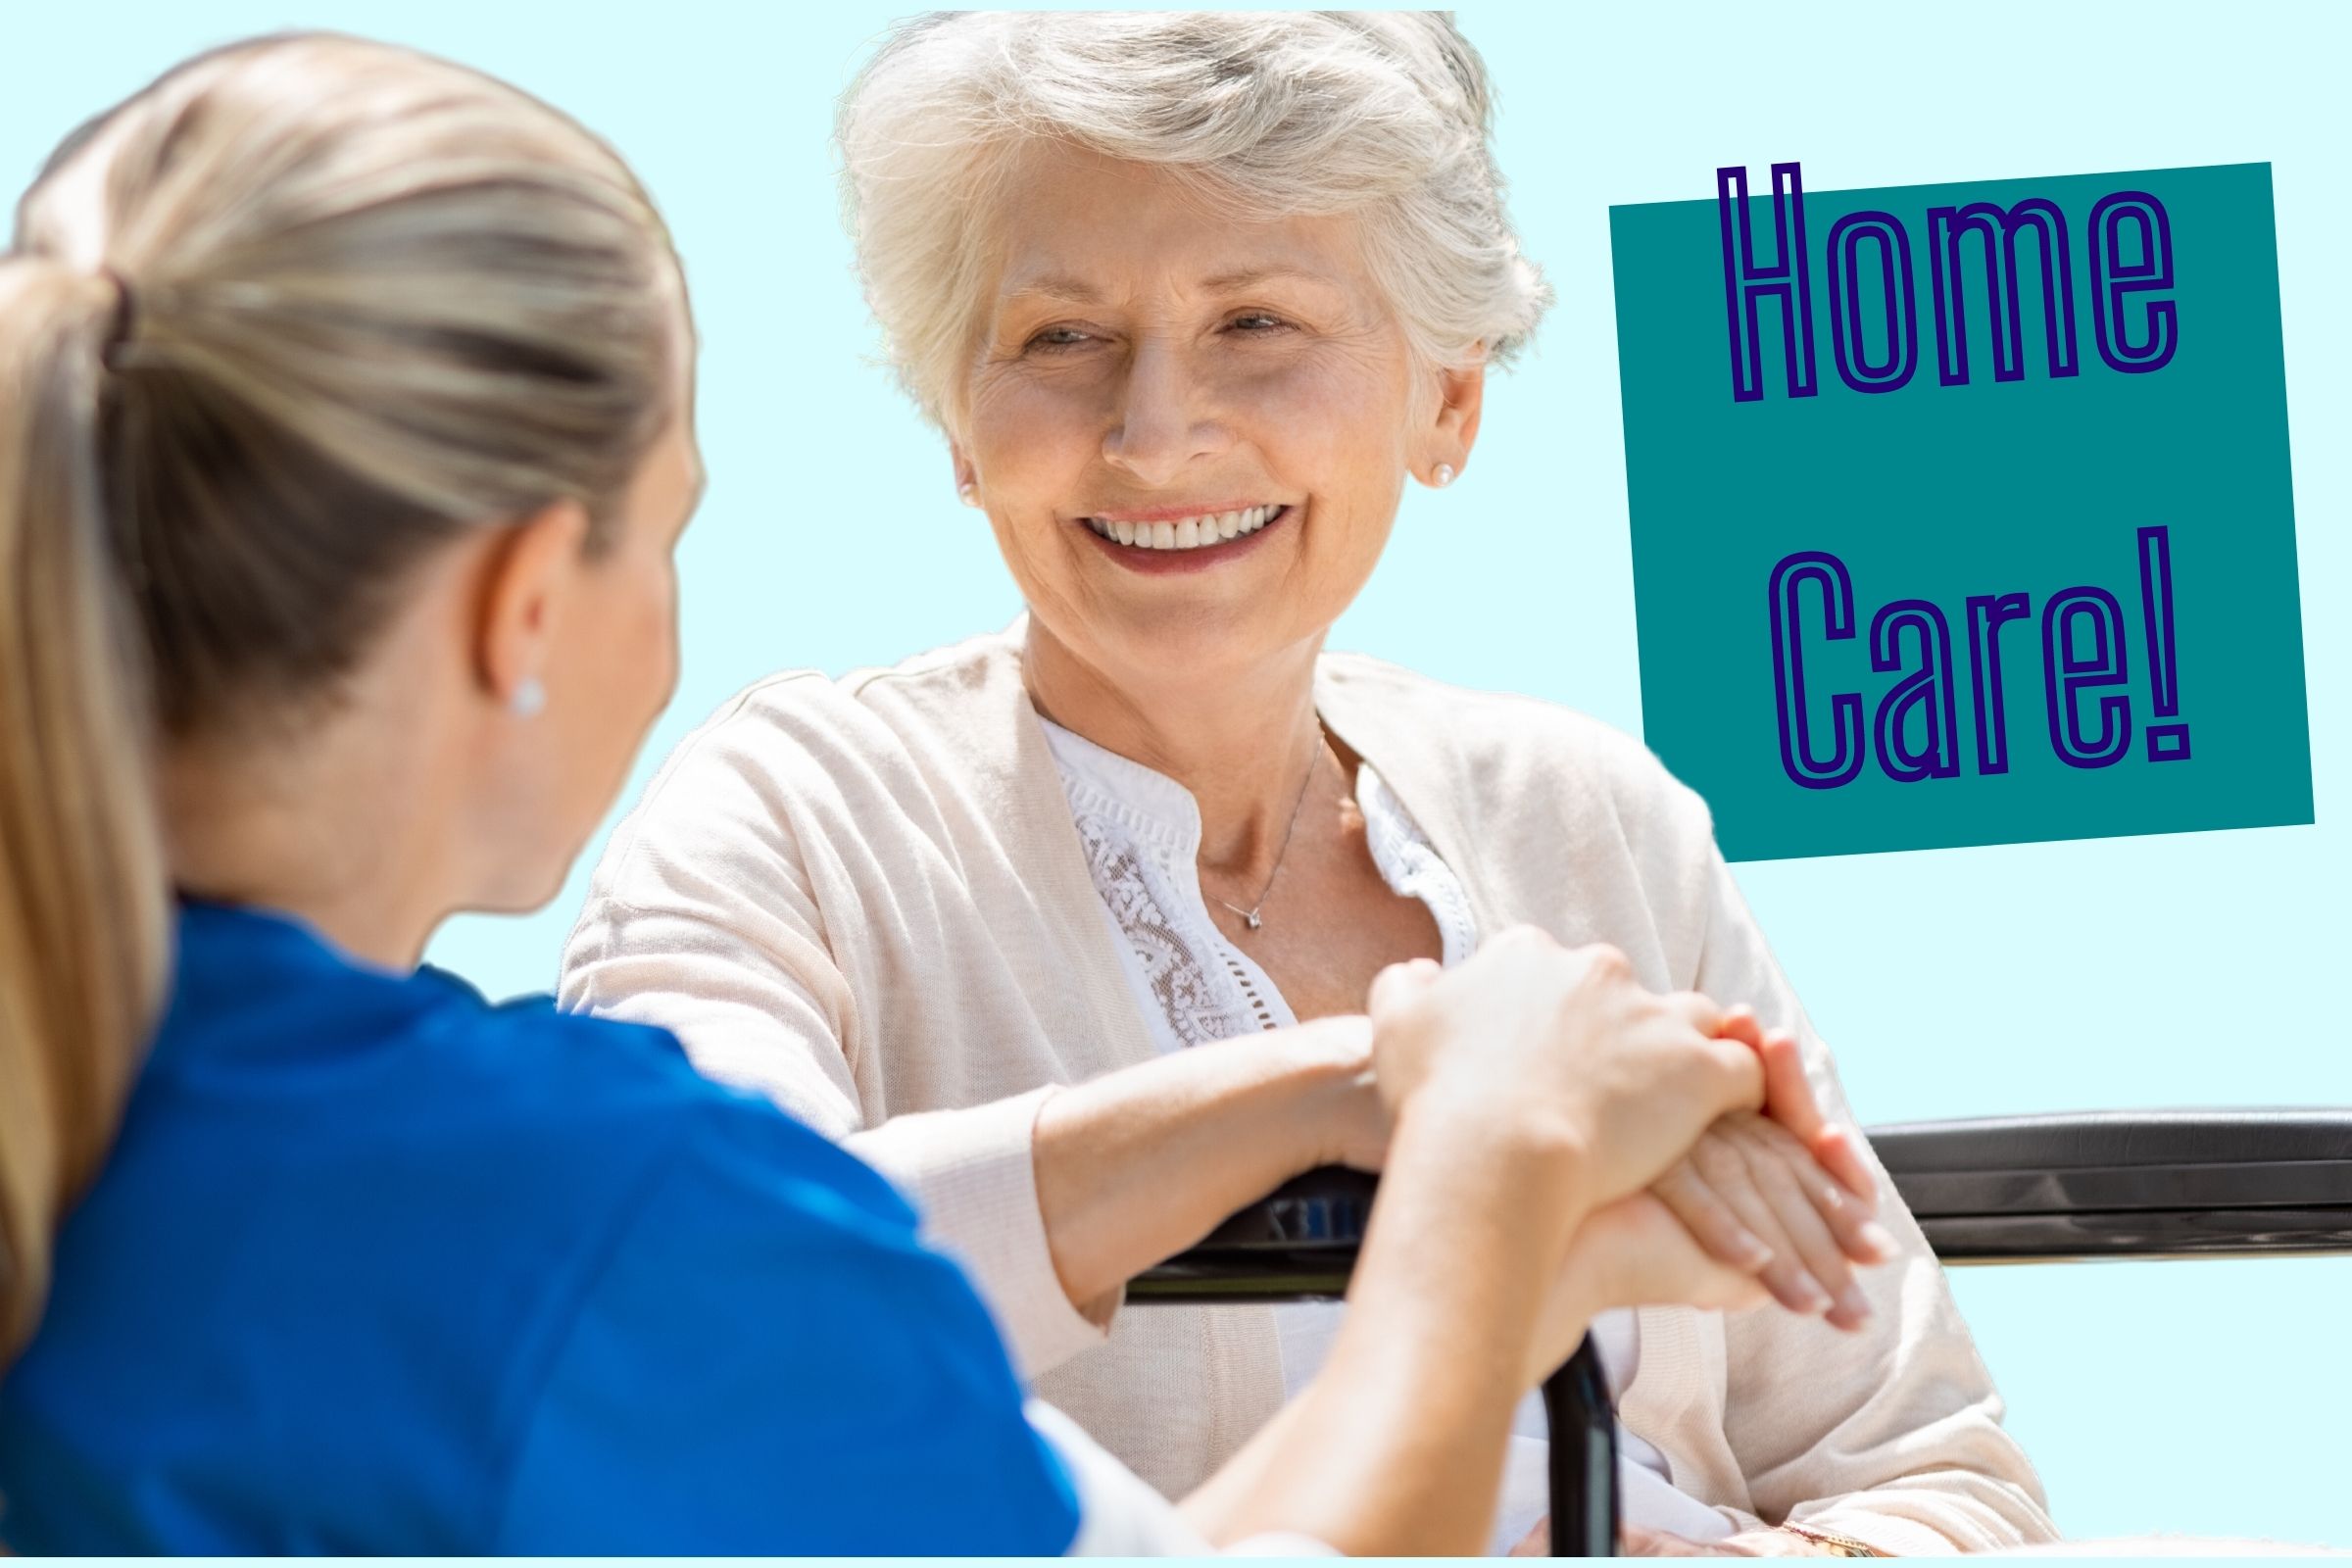 Home Care Services in Norwich - Find a Home Care Agency